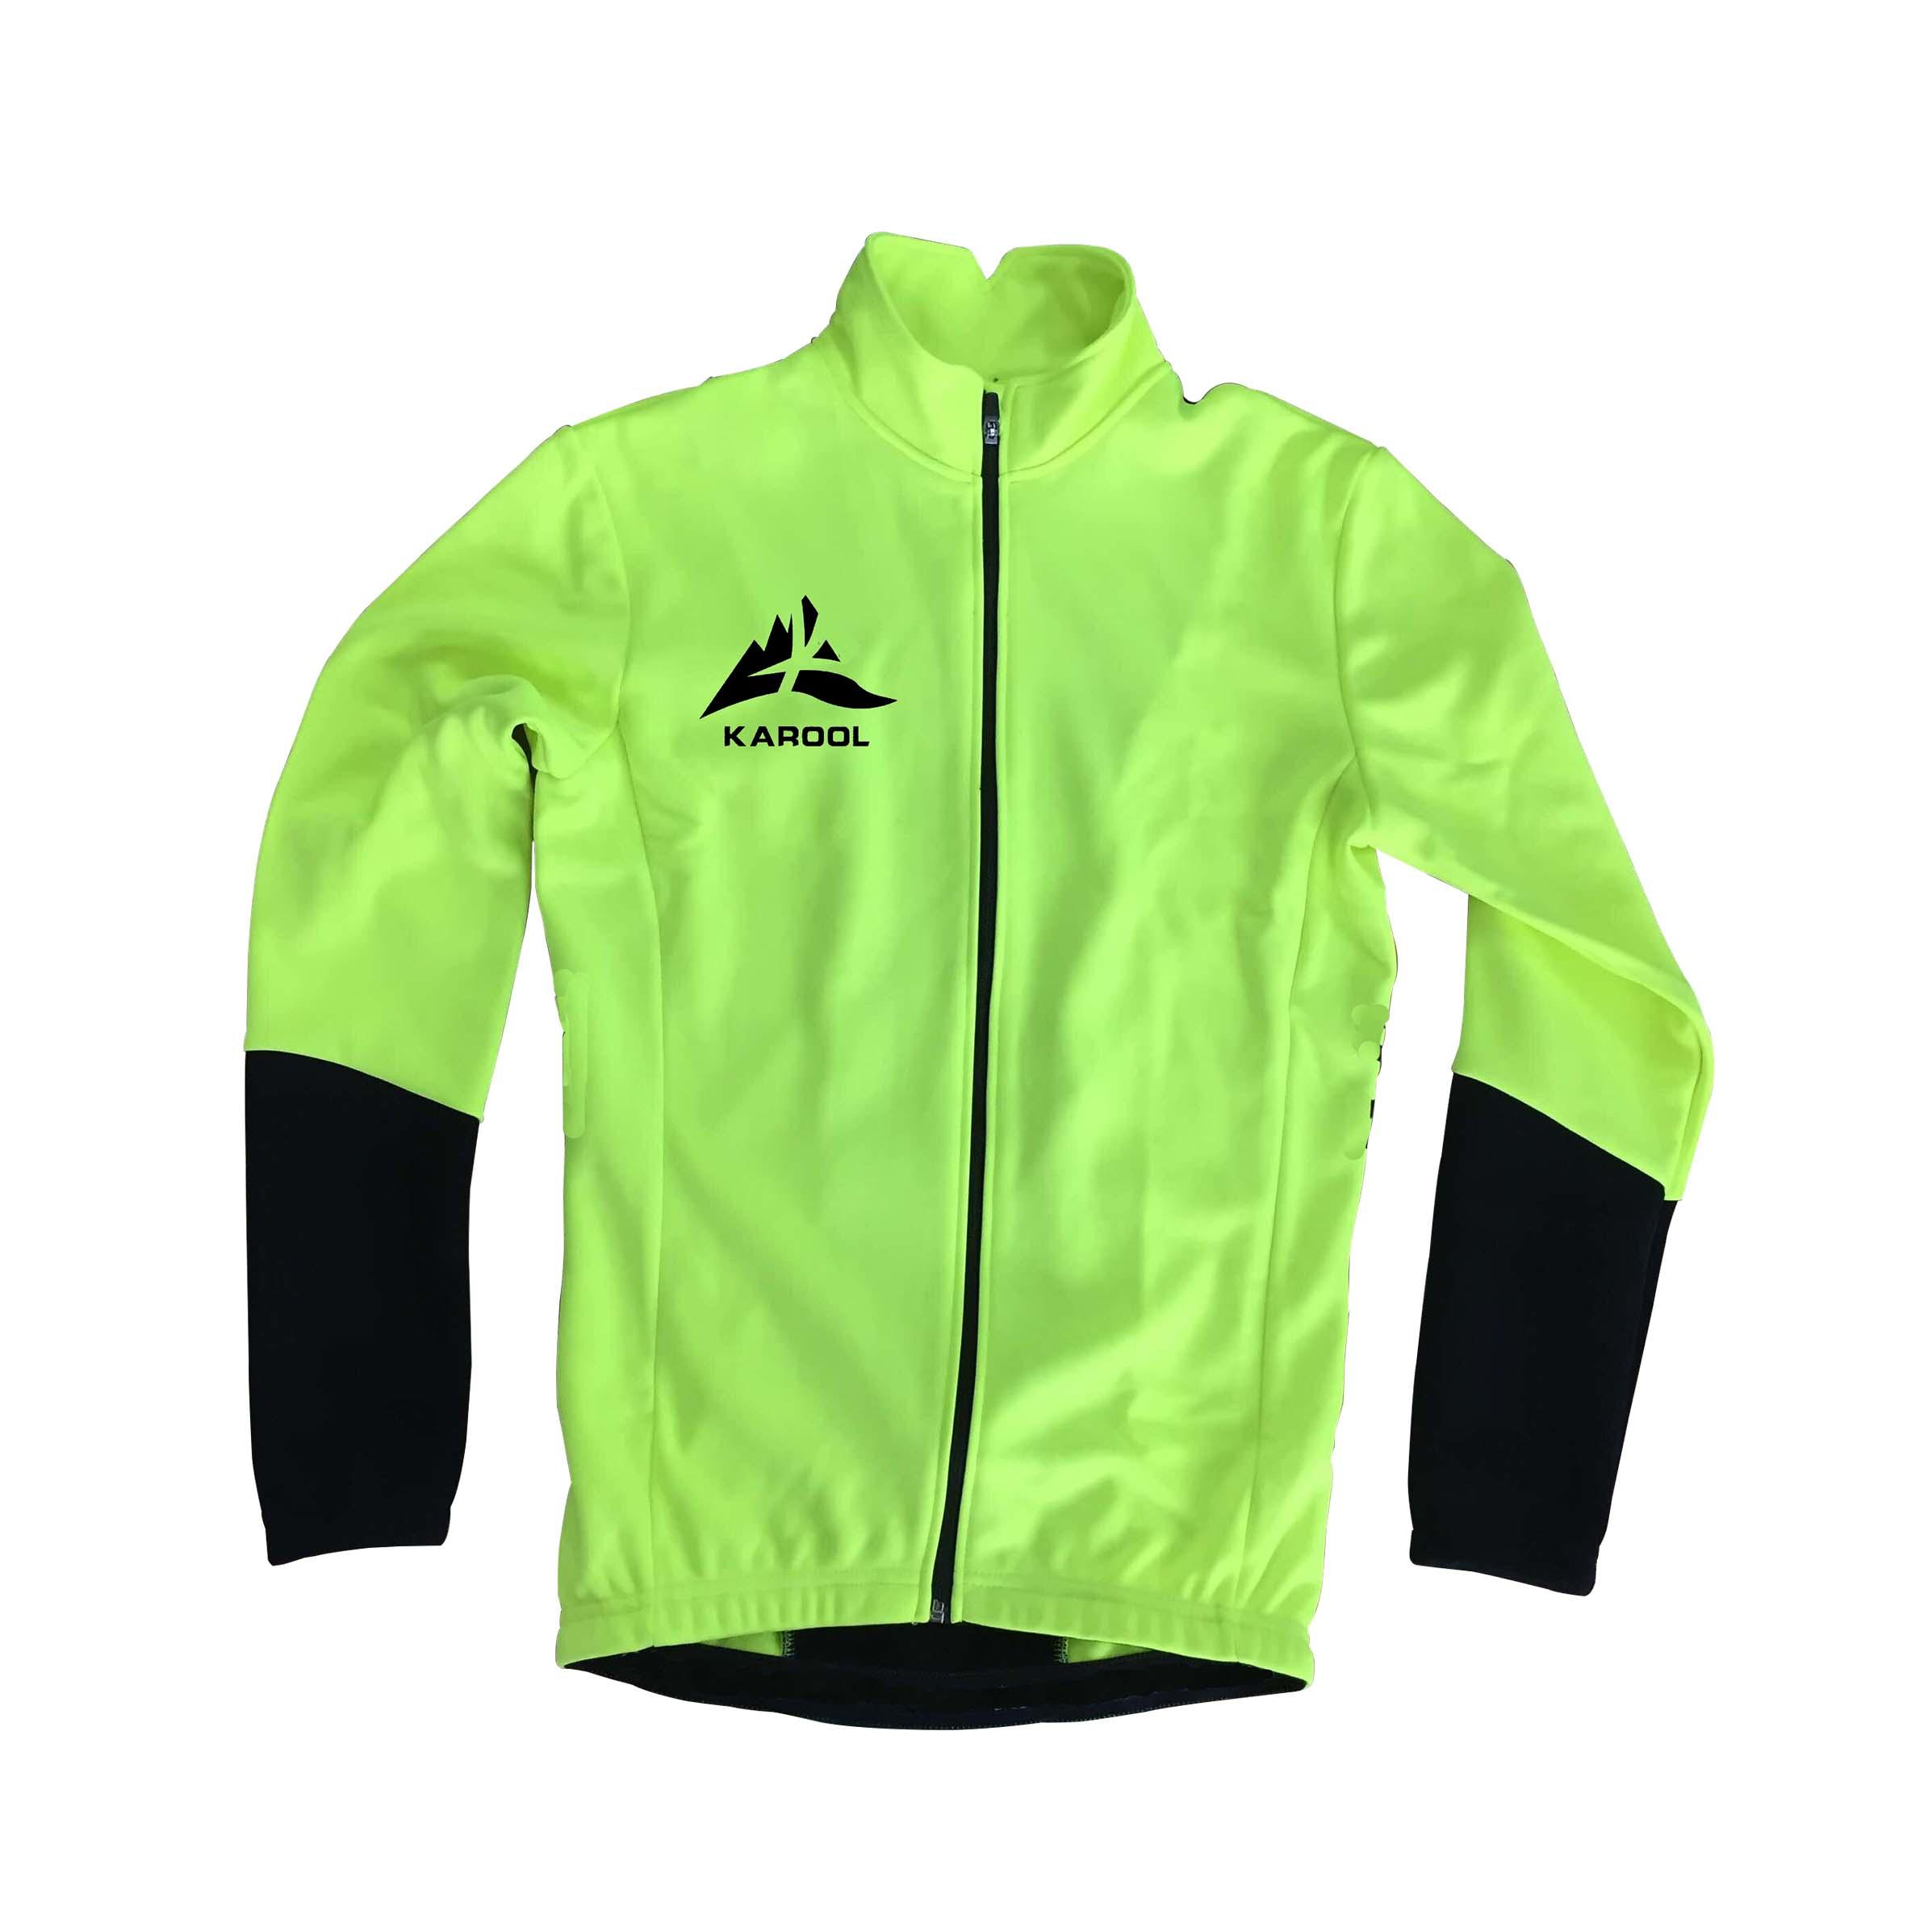 Karool durable lightweight cycling jacket with good price for men-1